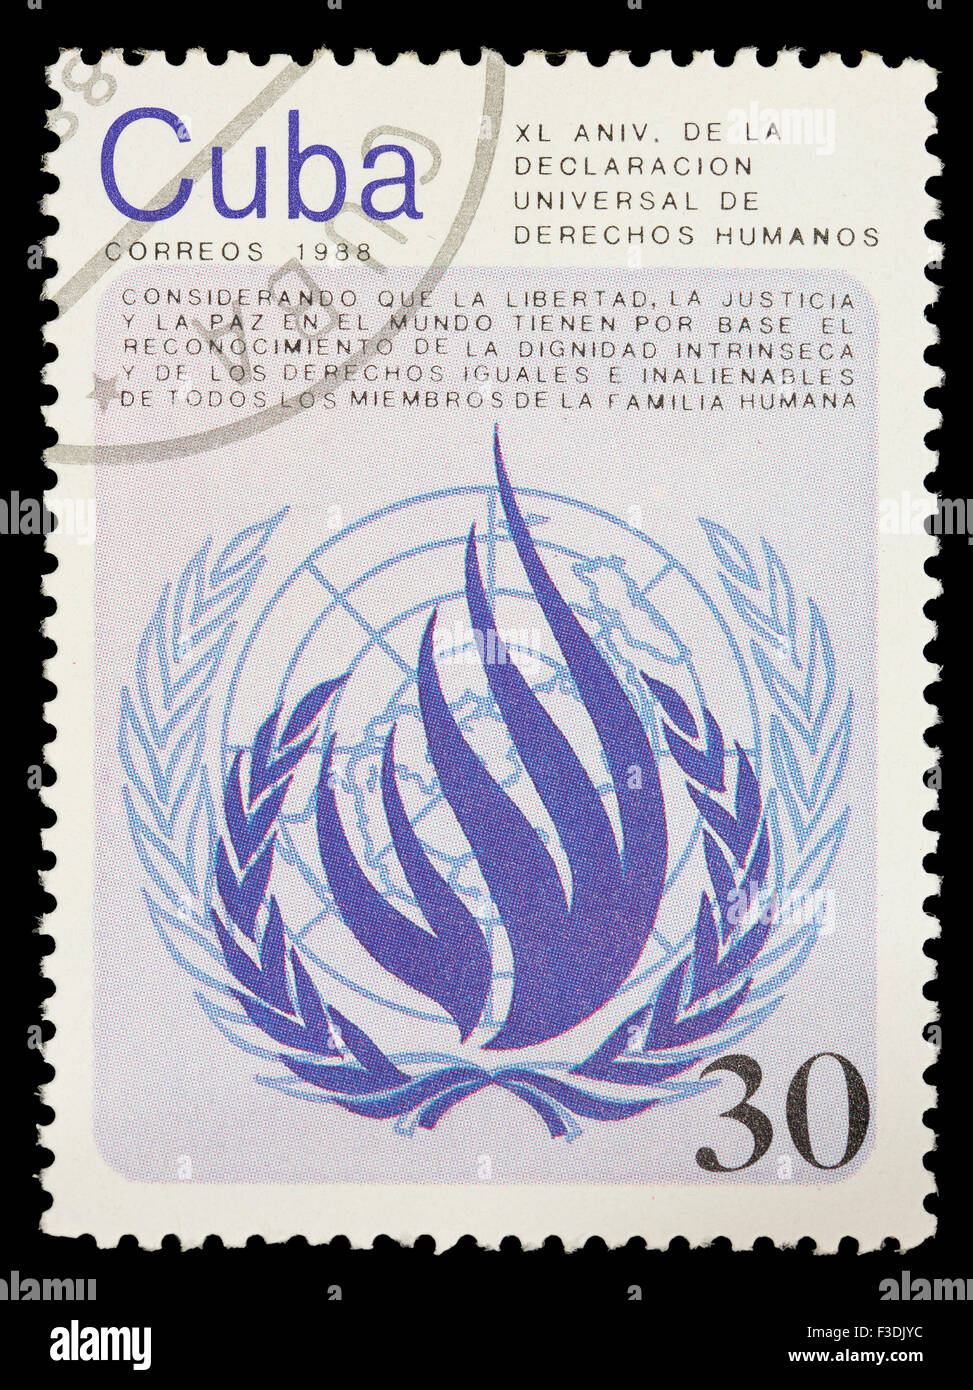 CUBA - CIRCA 1988: A postage stamp printed in Cuba shows the Emblem of UNESCO for Human rights, circa 1988 Stock Photo